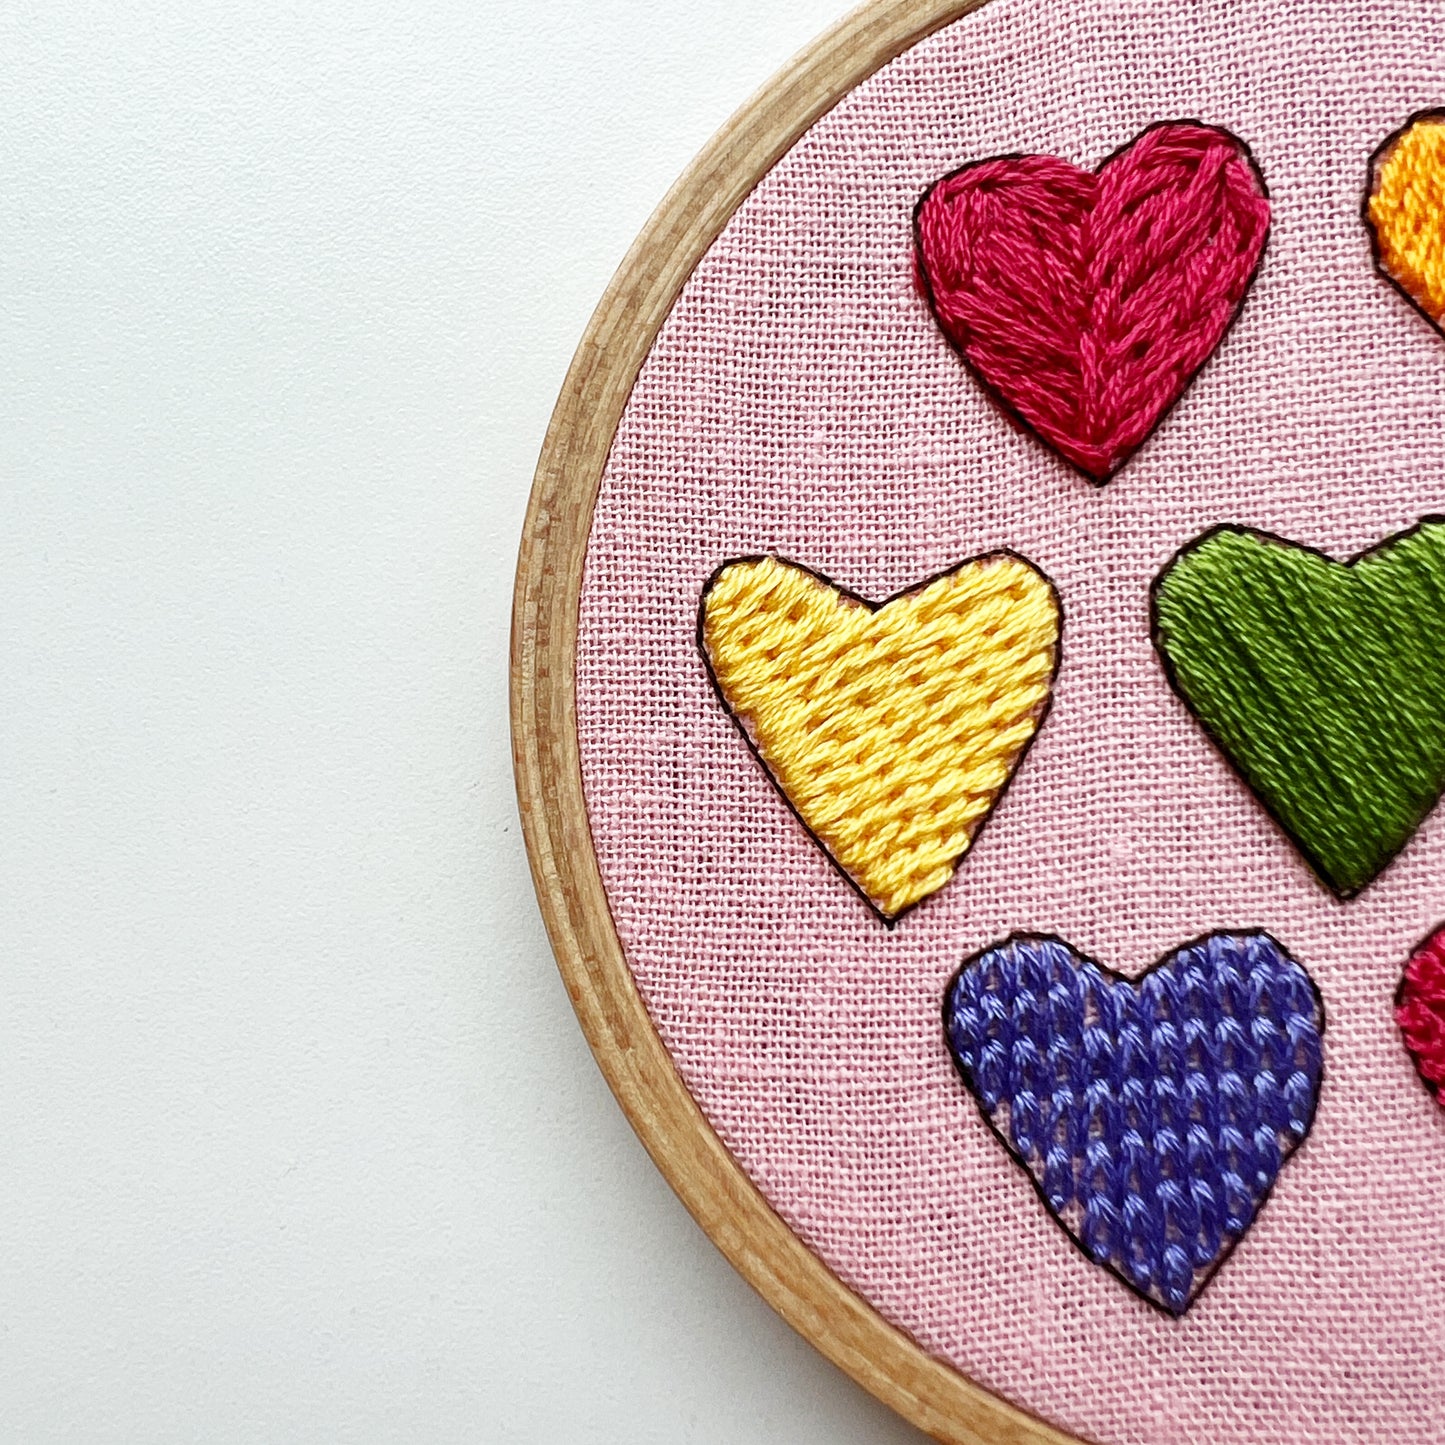 I Heart Stitching Beginner Embroidery Kit